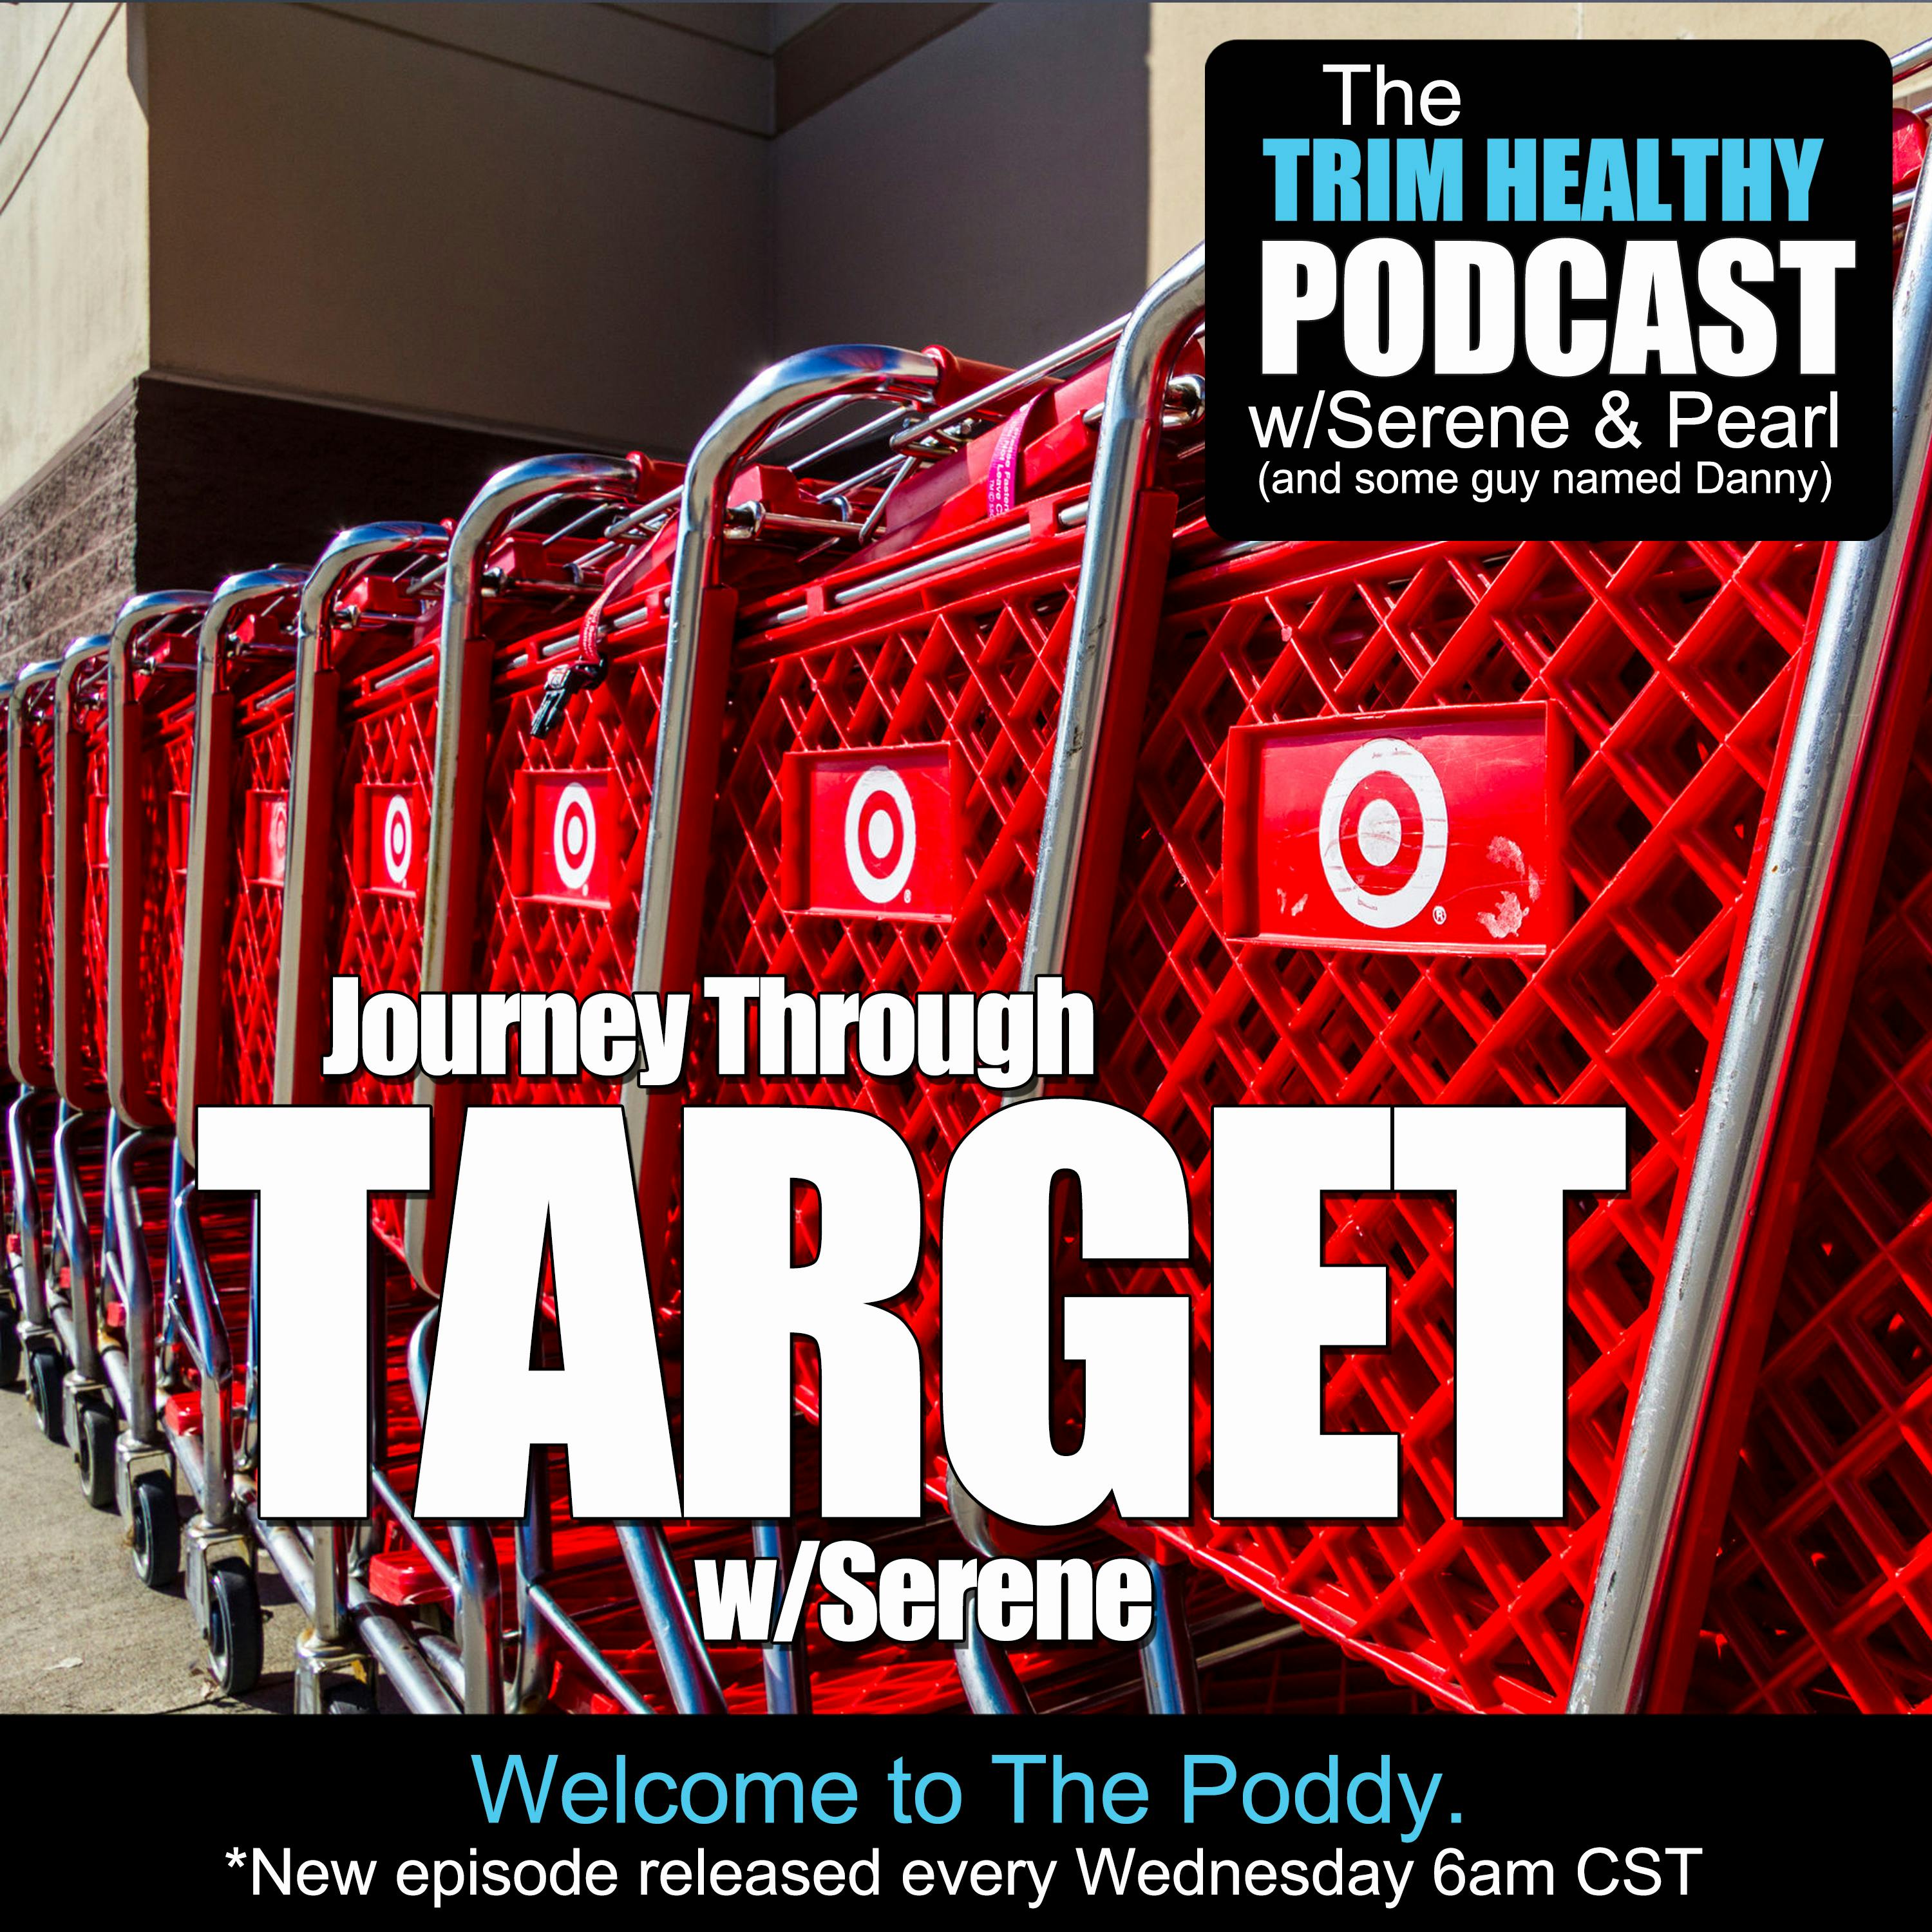 Ep 156: Journey Through Target With Serene